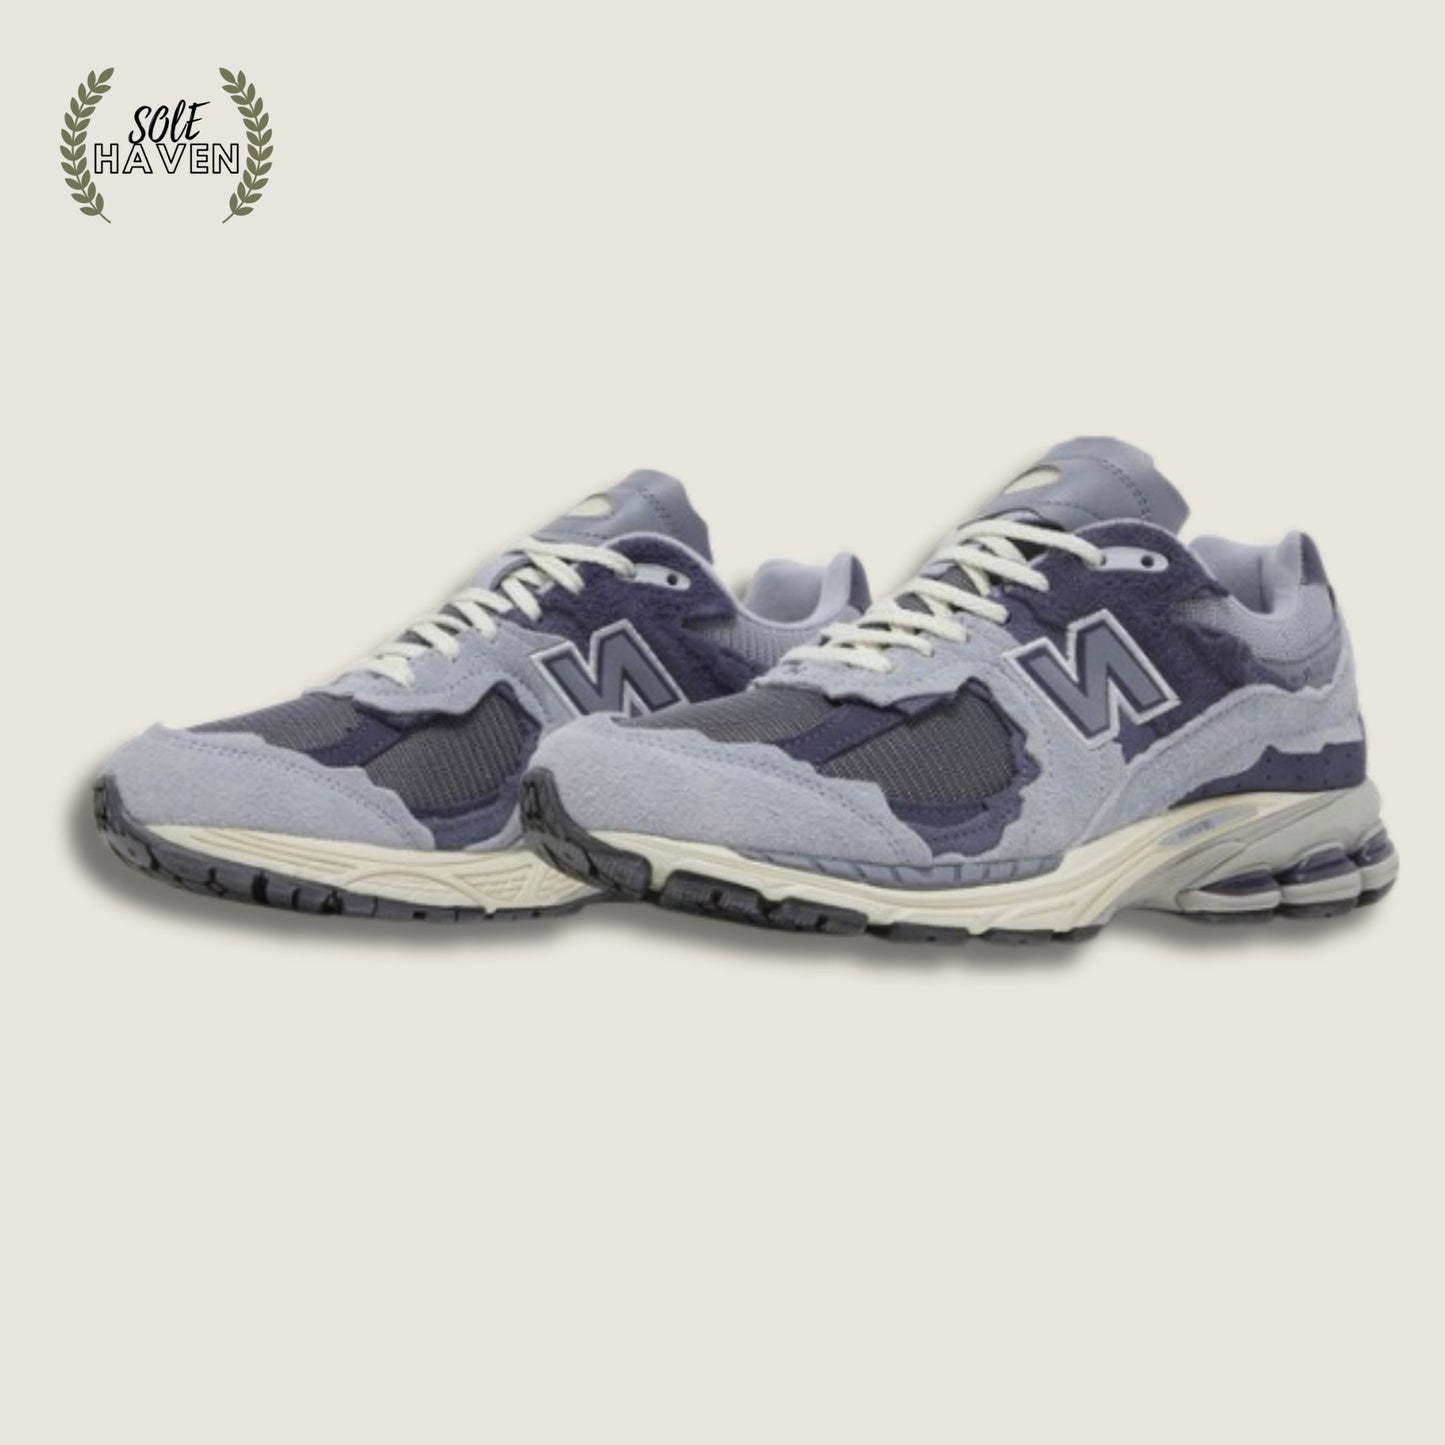 New Balance 2002R 'Protection Pack - Purple' - Sole HavenShoesNew Balance